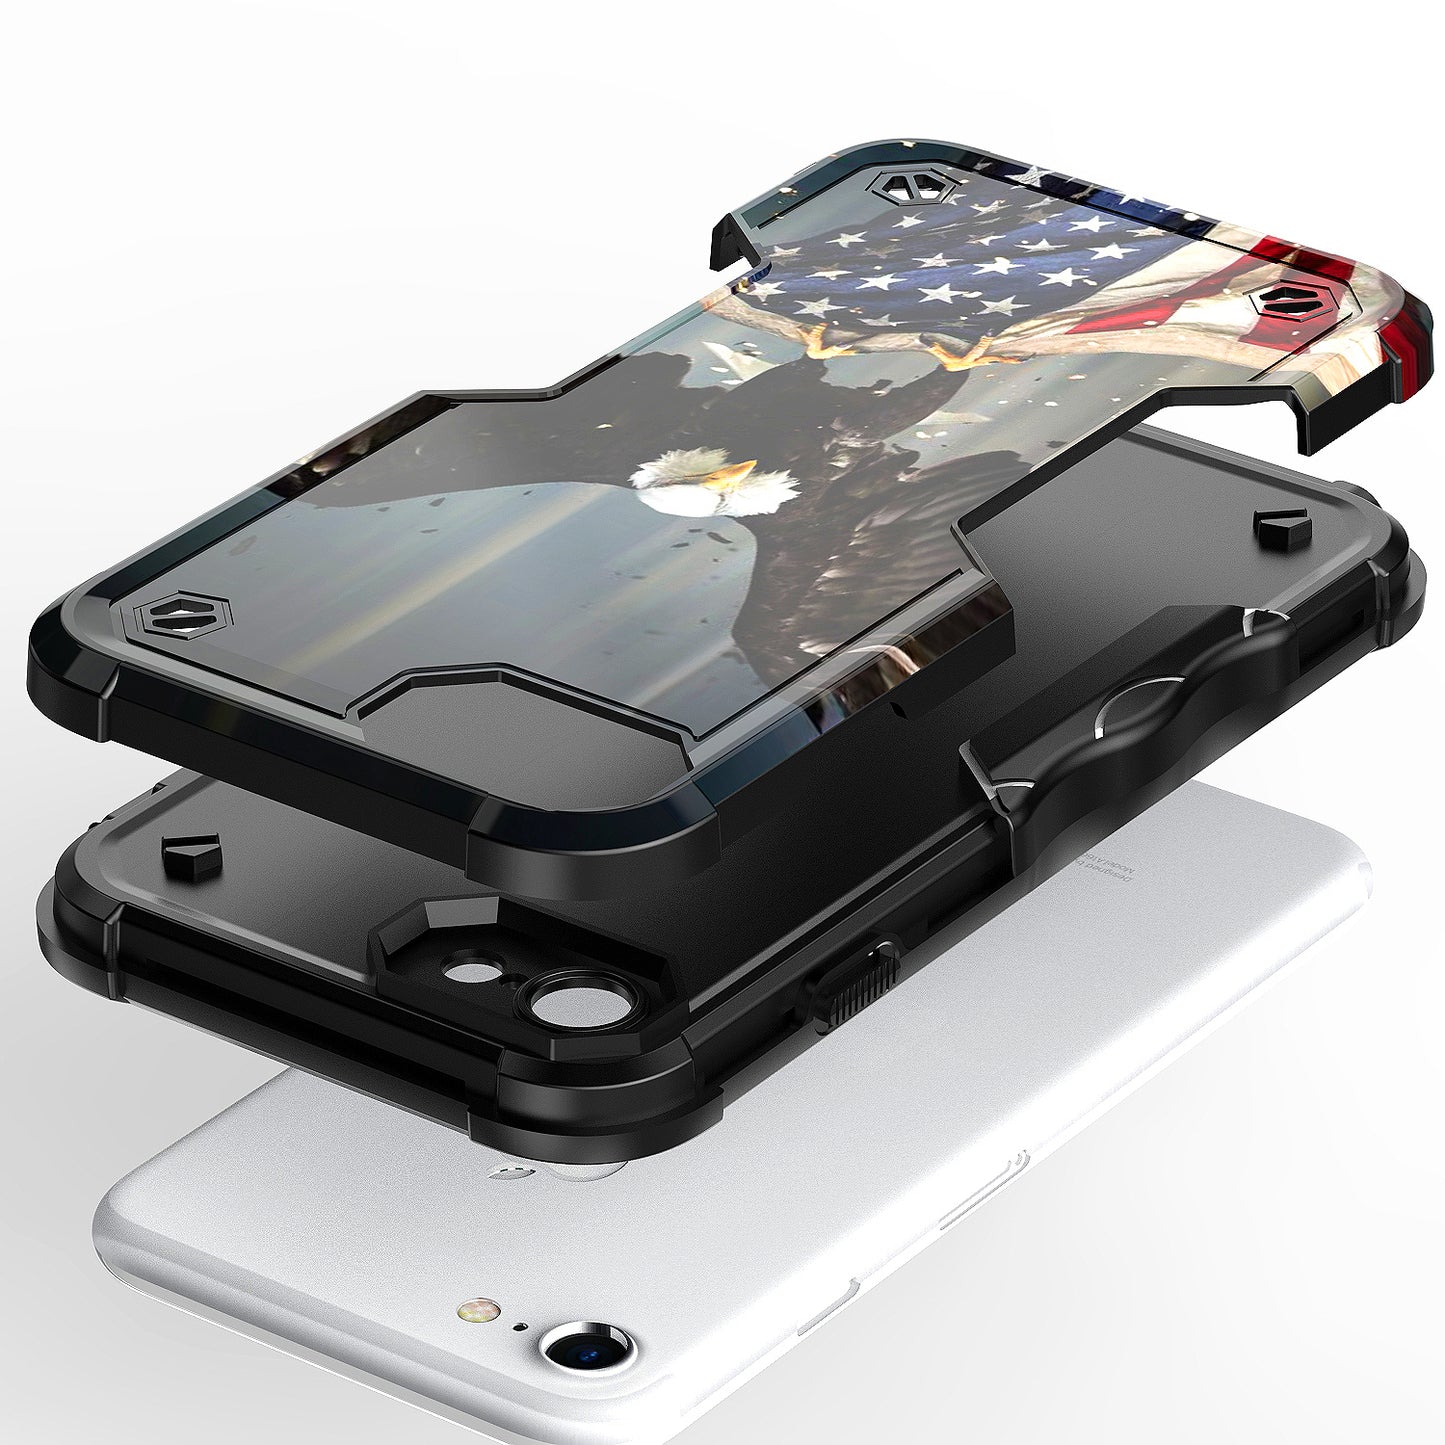 Case For Apple iPhone 6 - Hybrid Grip Design Shockproof Phone Cover - American Bald Eagle Flying with Flag